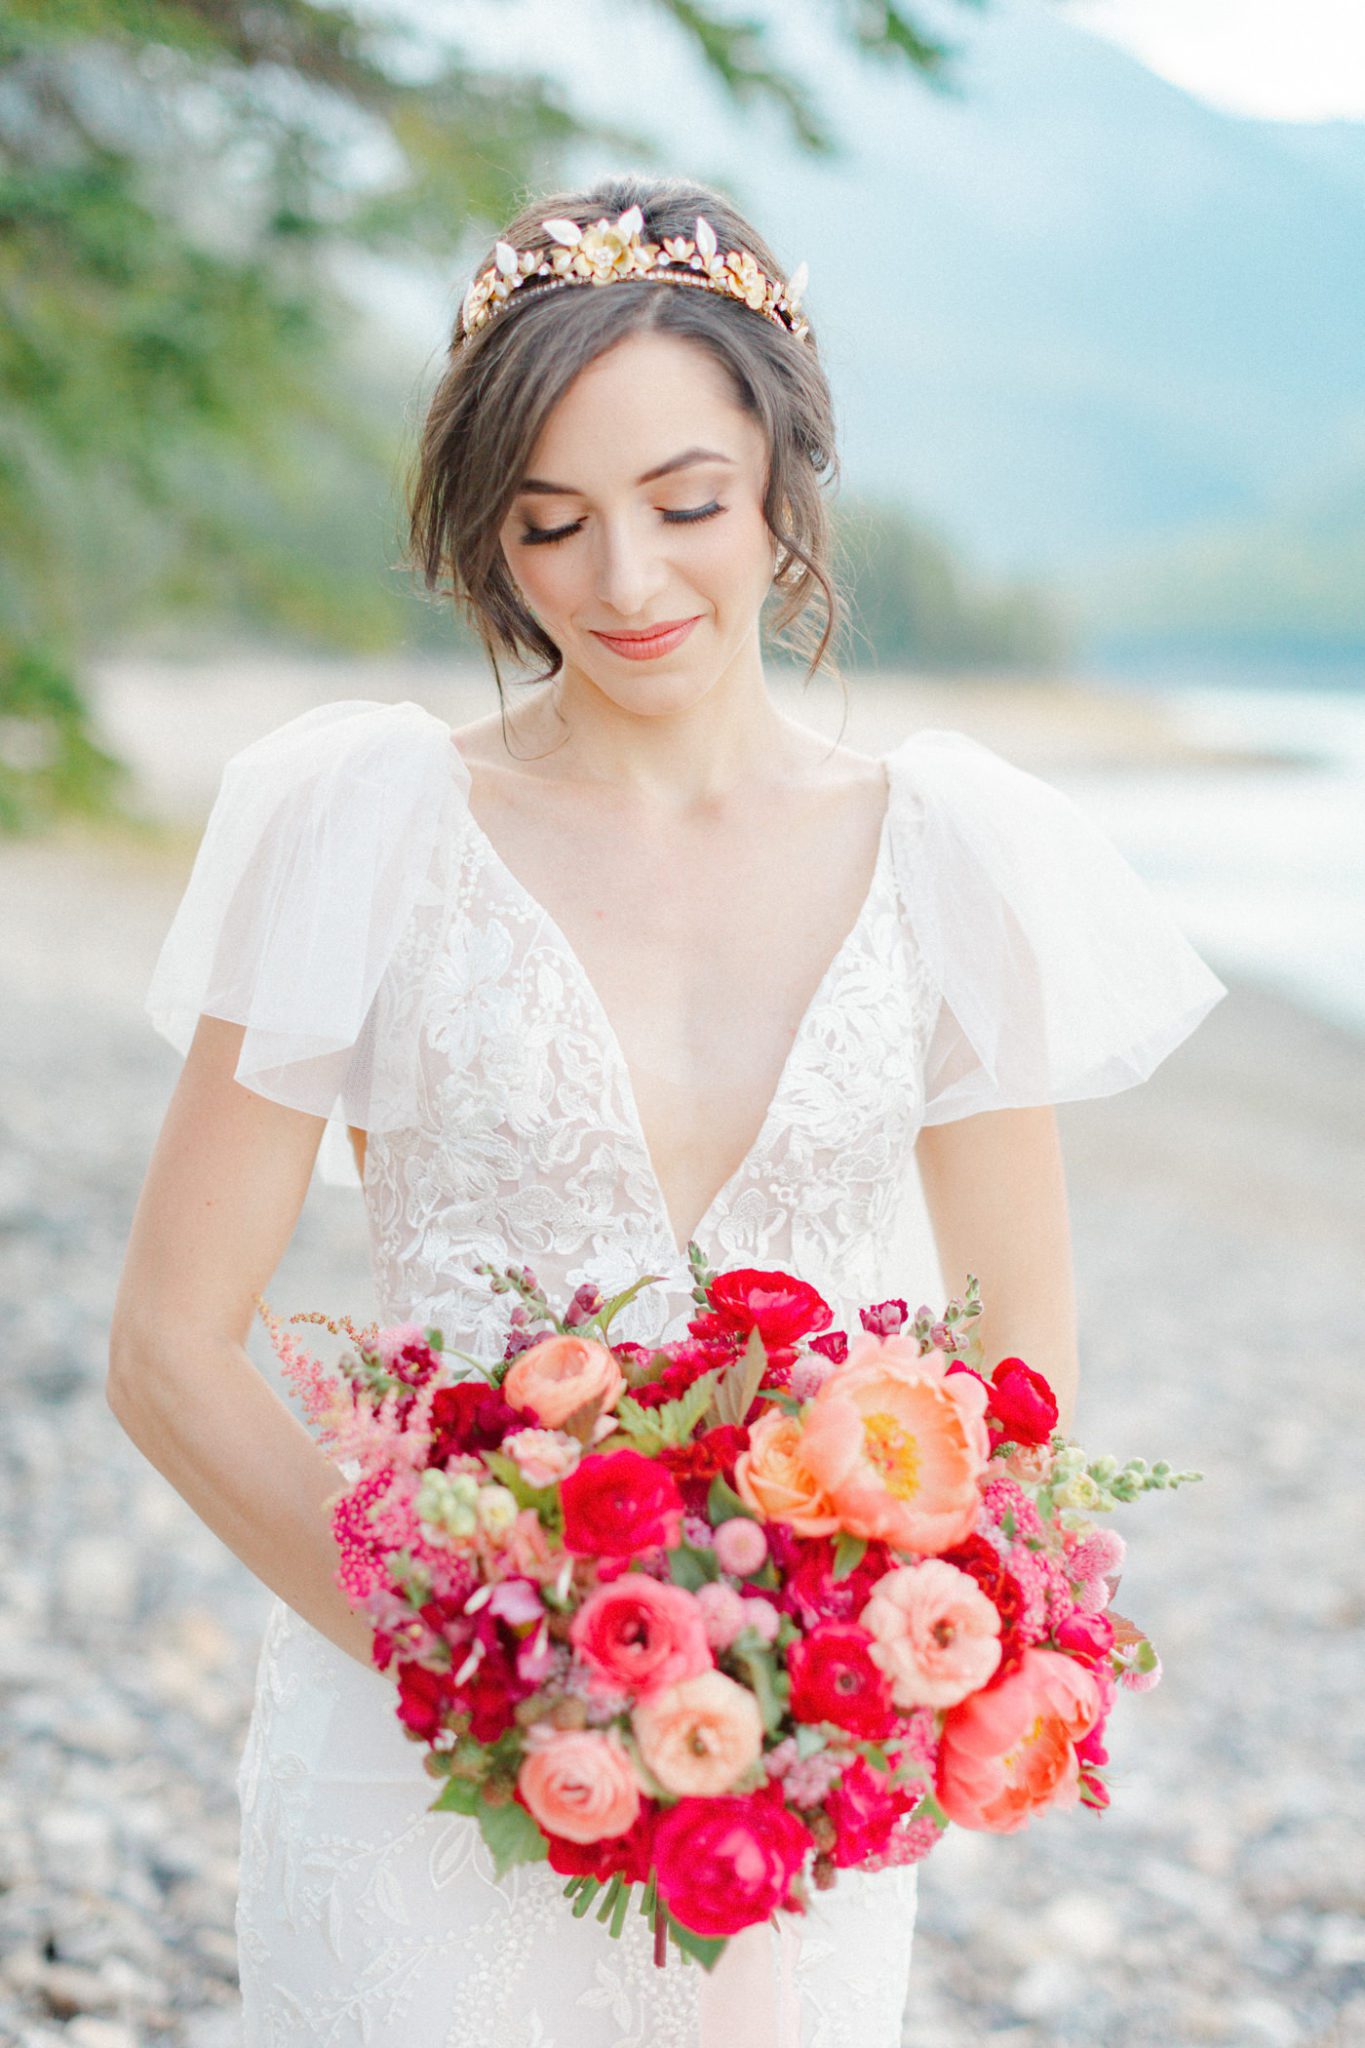 Vibrant bridal bouquet for this dreamy lakeside wedding inspiration